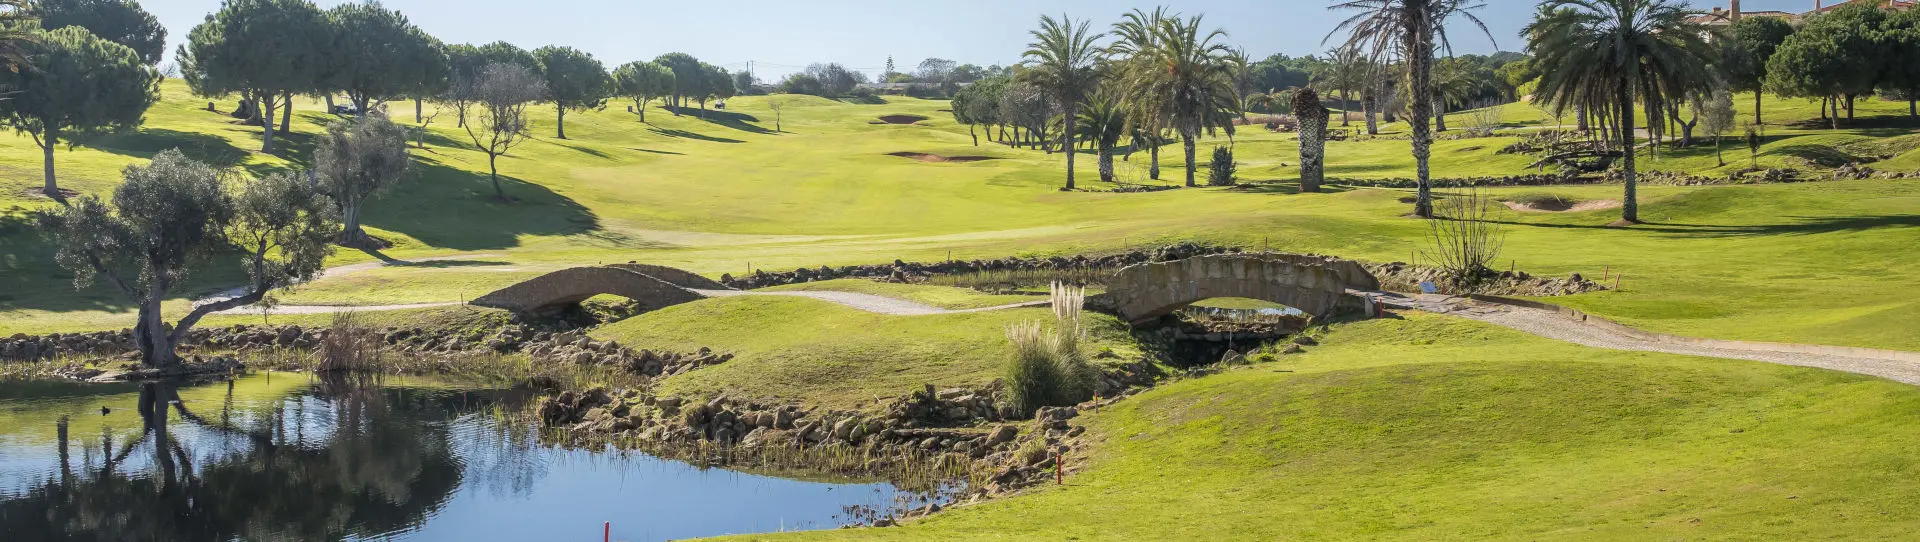 Portugal golf holidays - 3 Nights SC & Unlimited Golf Rounds - Photo 3